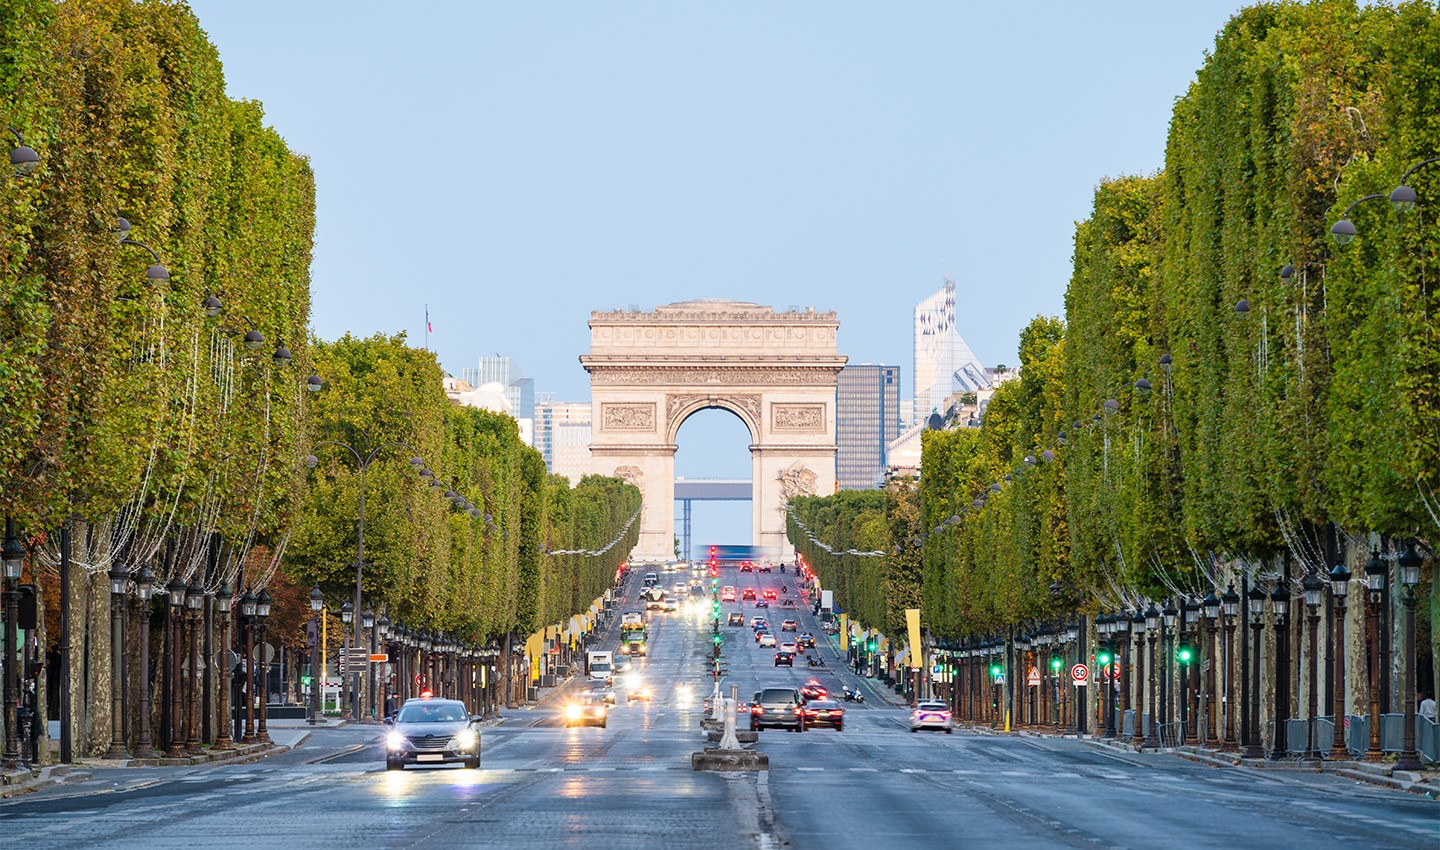 A picture looking down the Champs Elysees towards the Arc de Triomphe